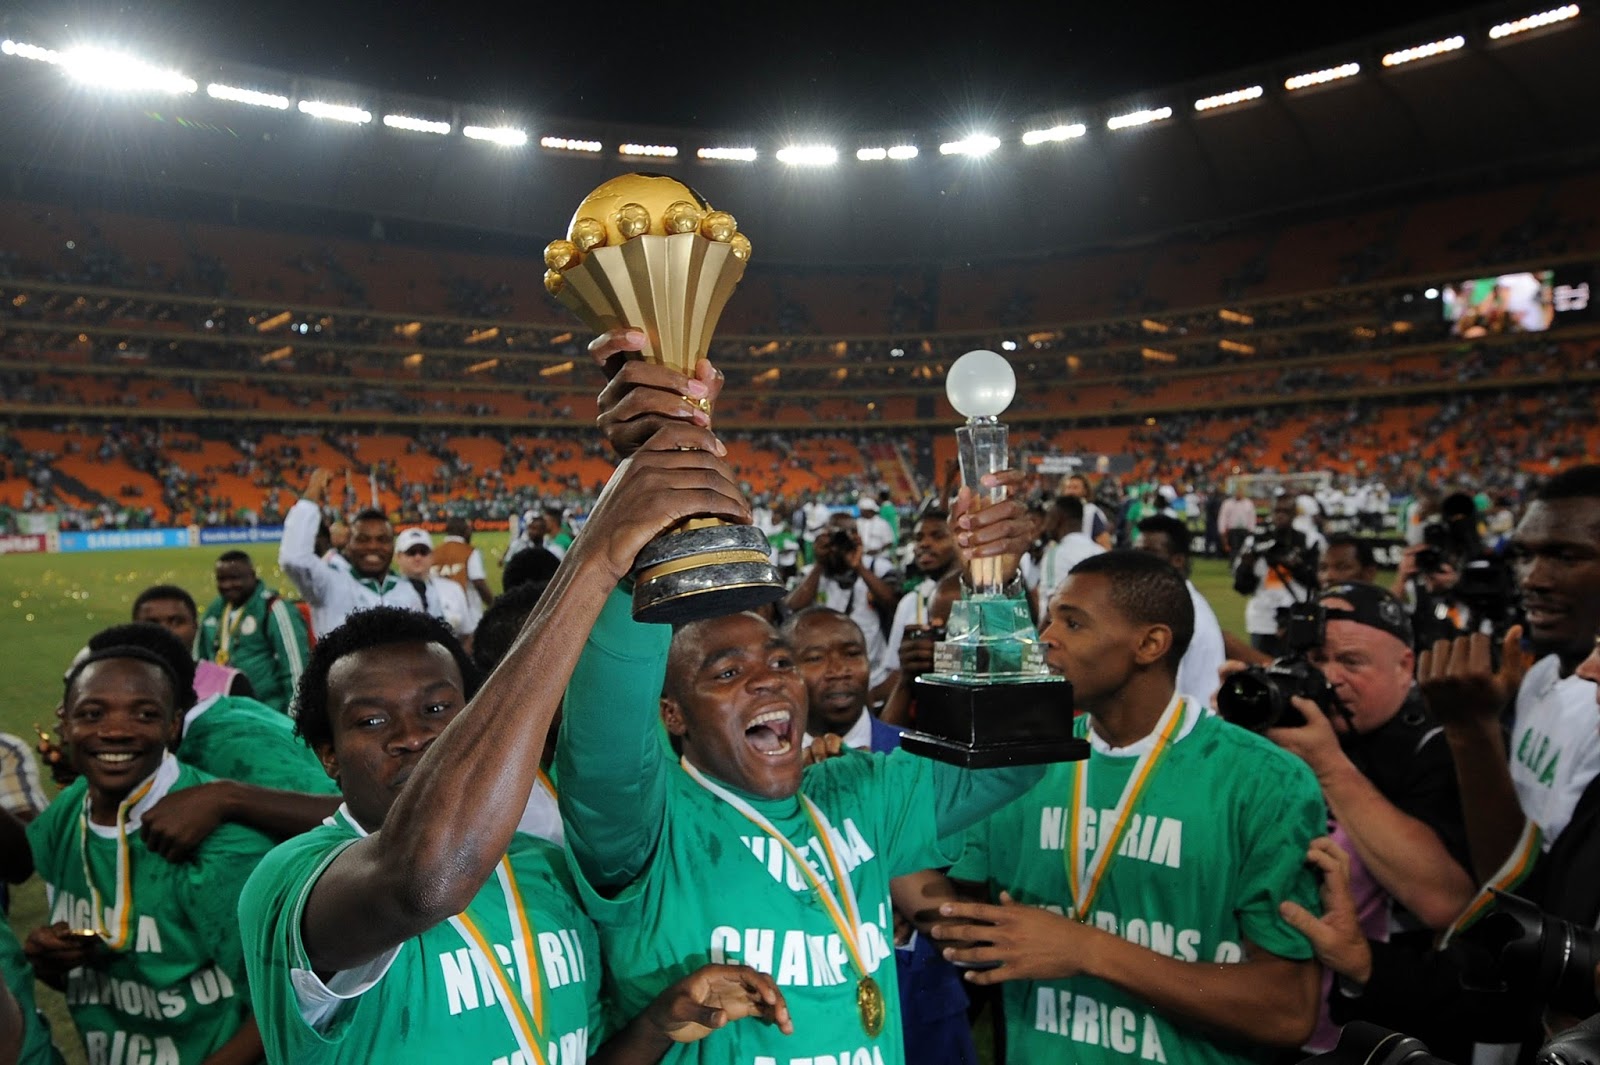 Soccer, football or whatever: Nigeria Greatest All-time 23 member team